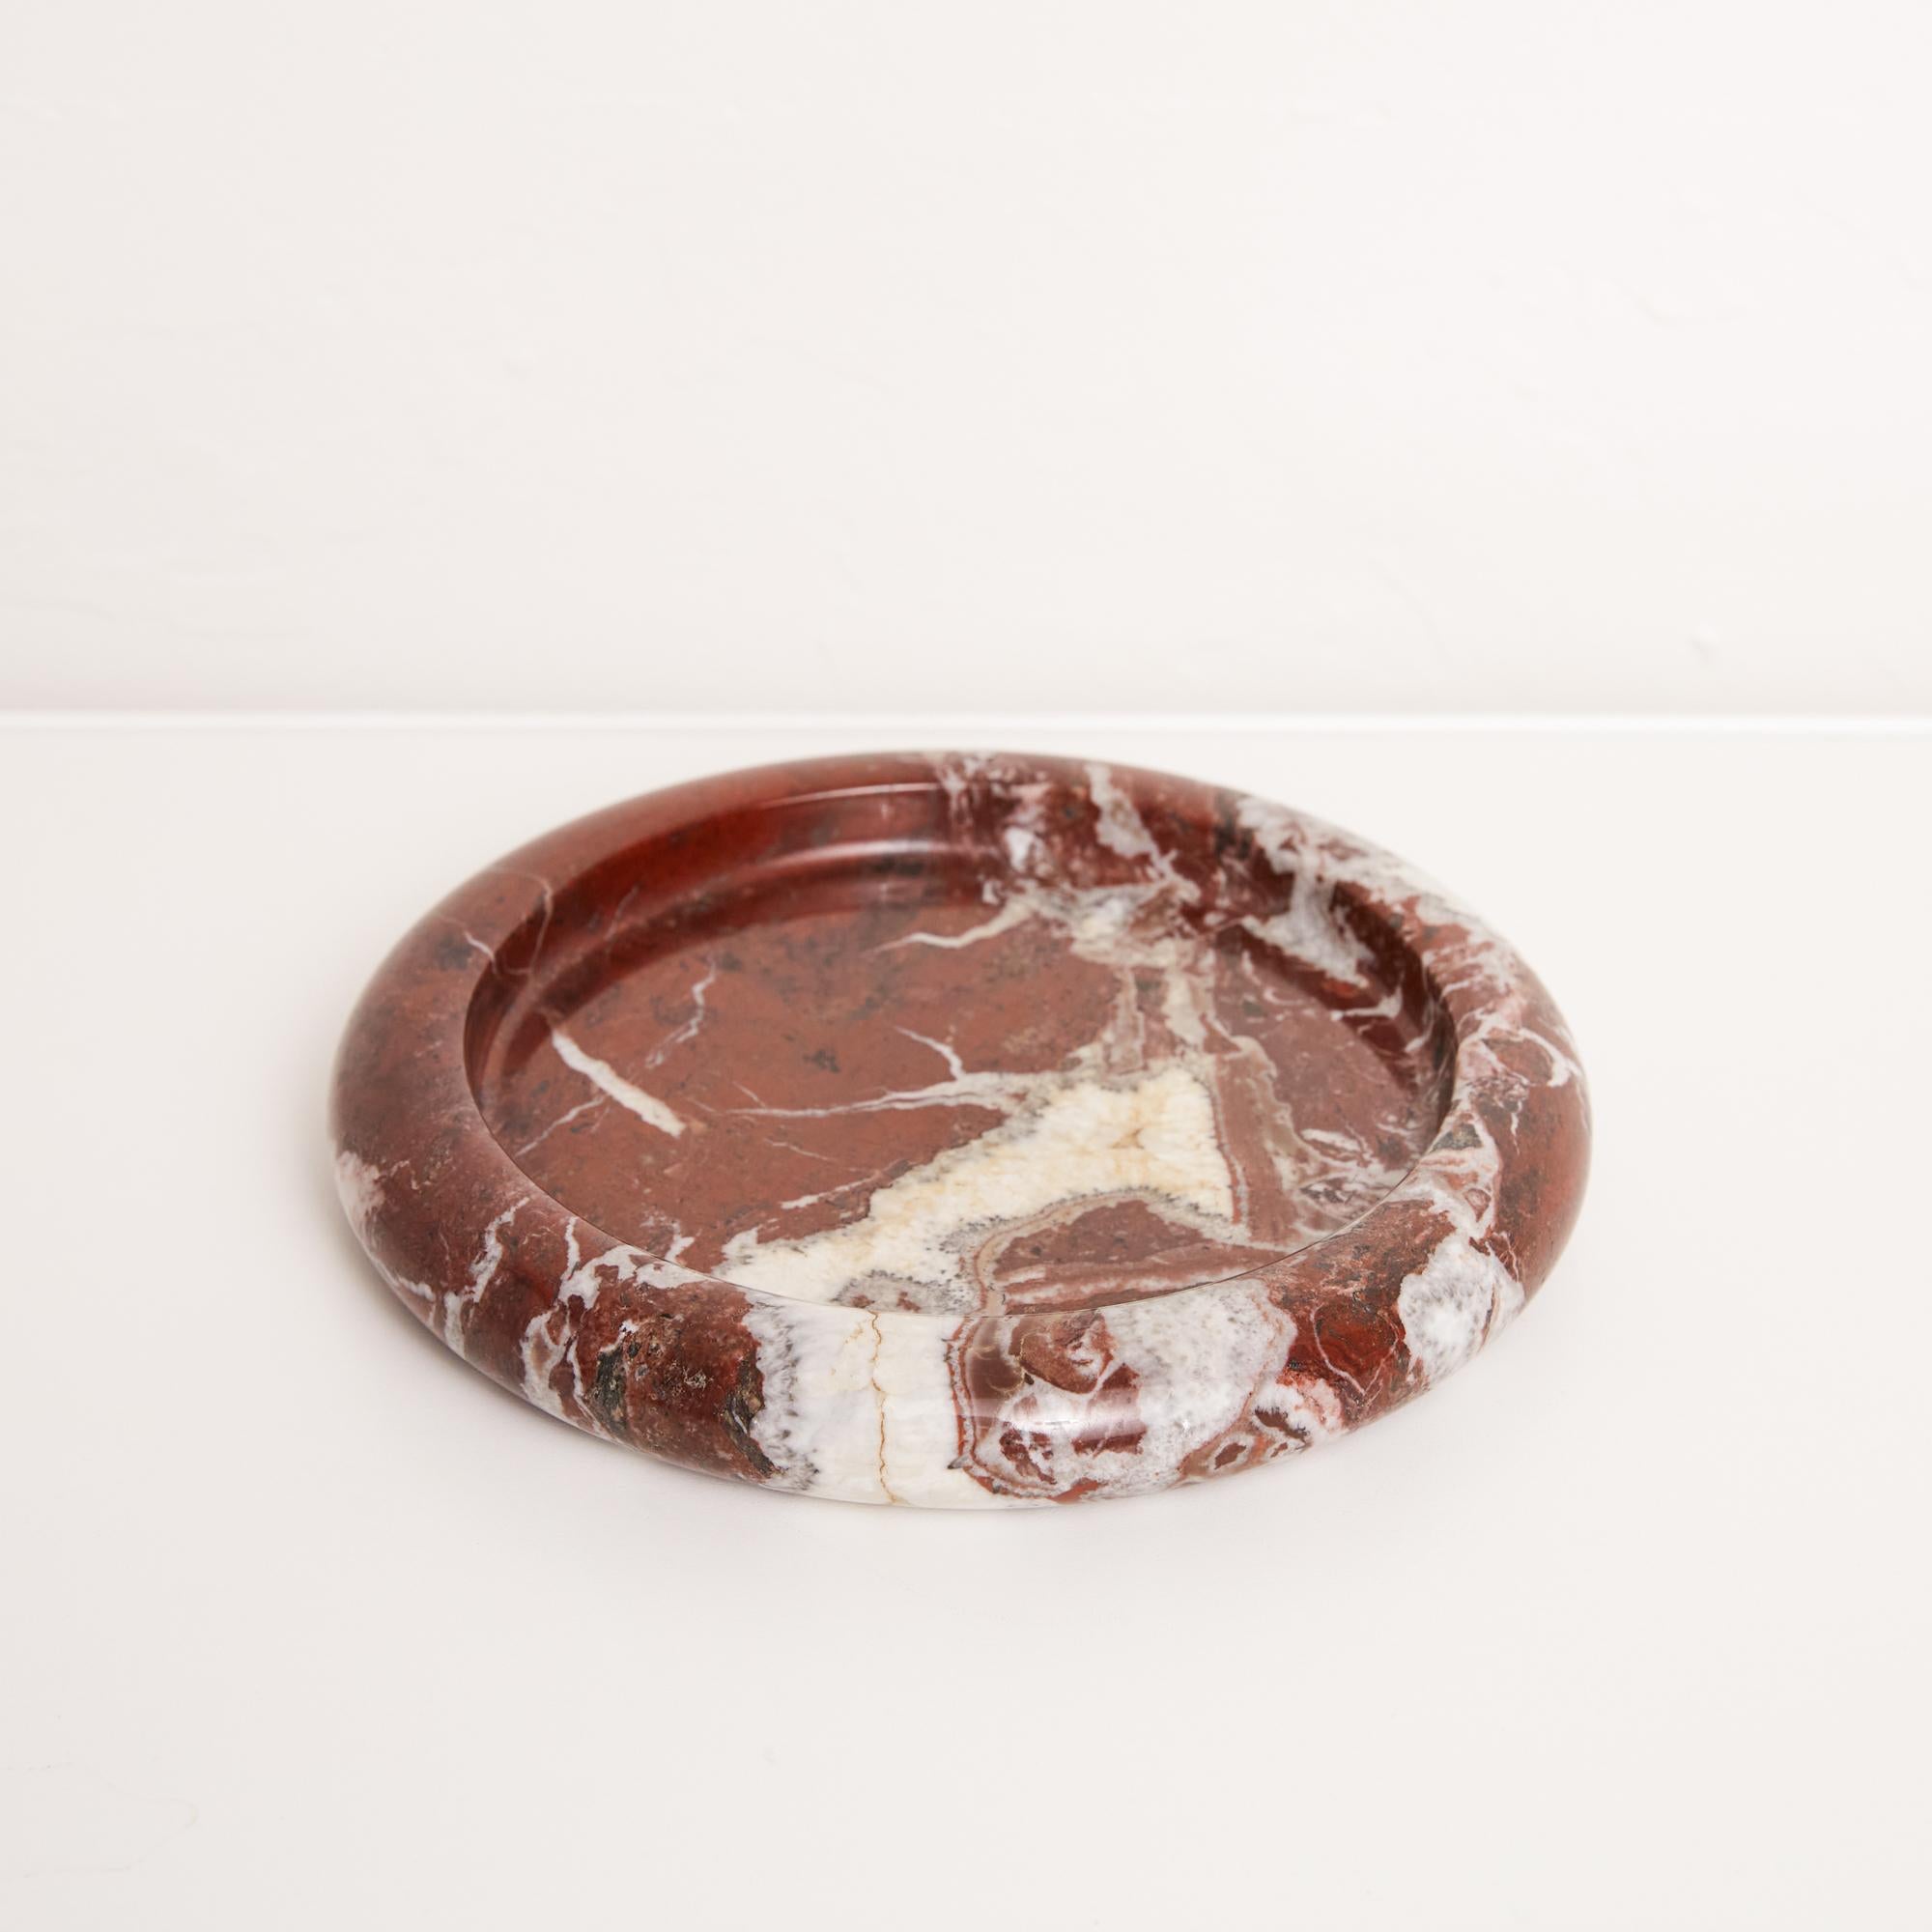 Fratelli Mannelli red marble tray, Italy, circa 1970s. The tray features a flat concave opening that allows it to serve as a vide poche, catchall, or ashtray. Its sleek form and Minimalist design, makes it the perfect decorative